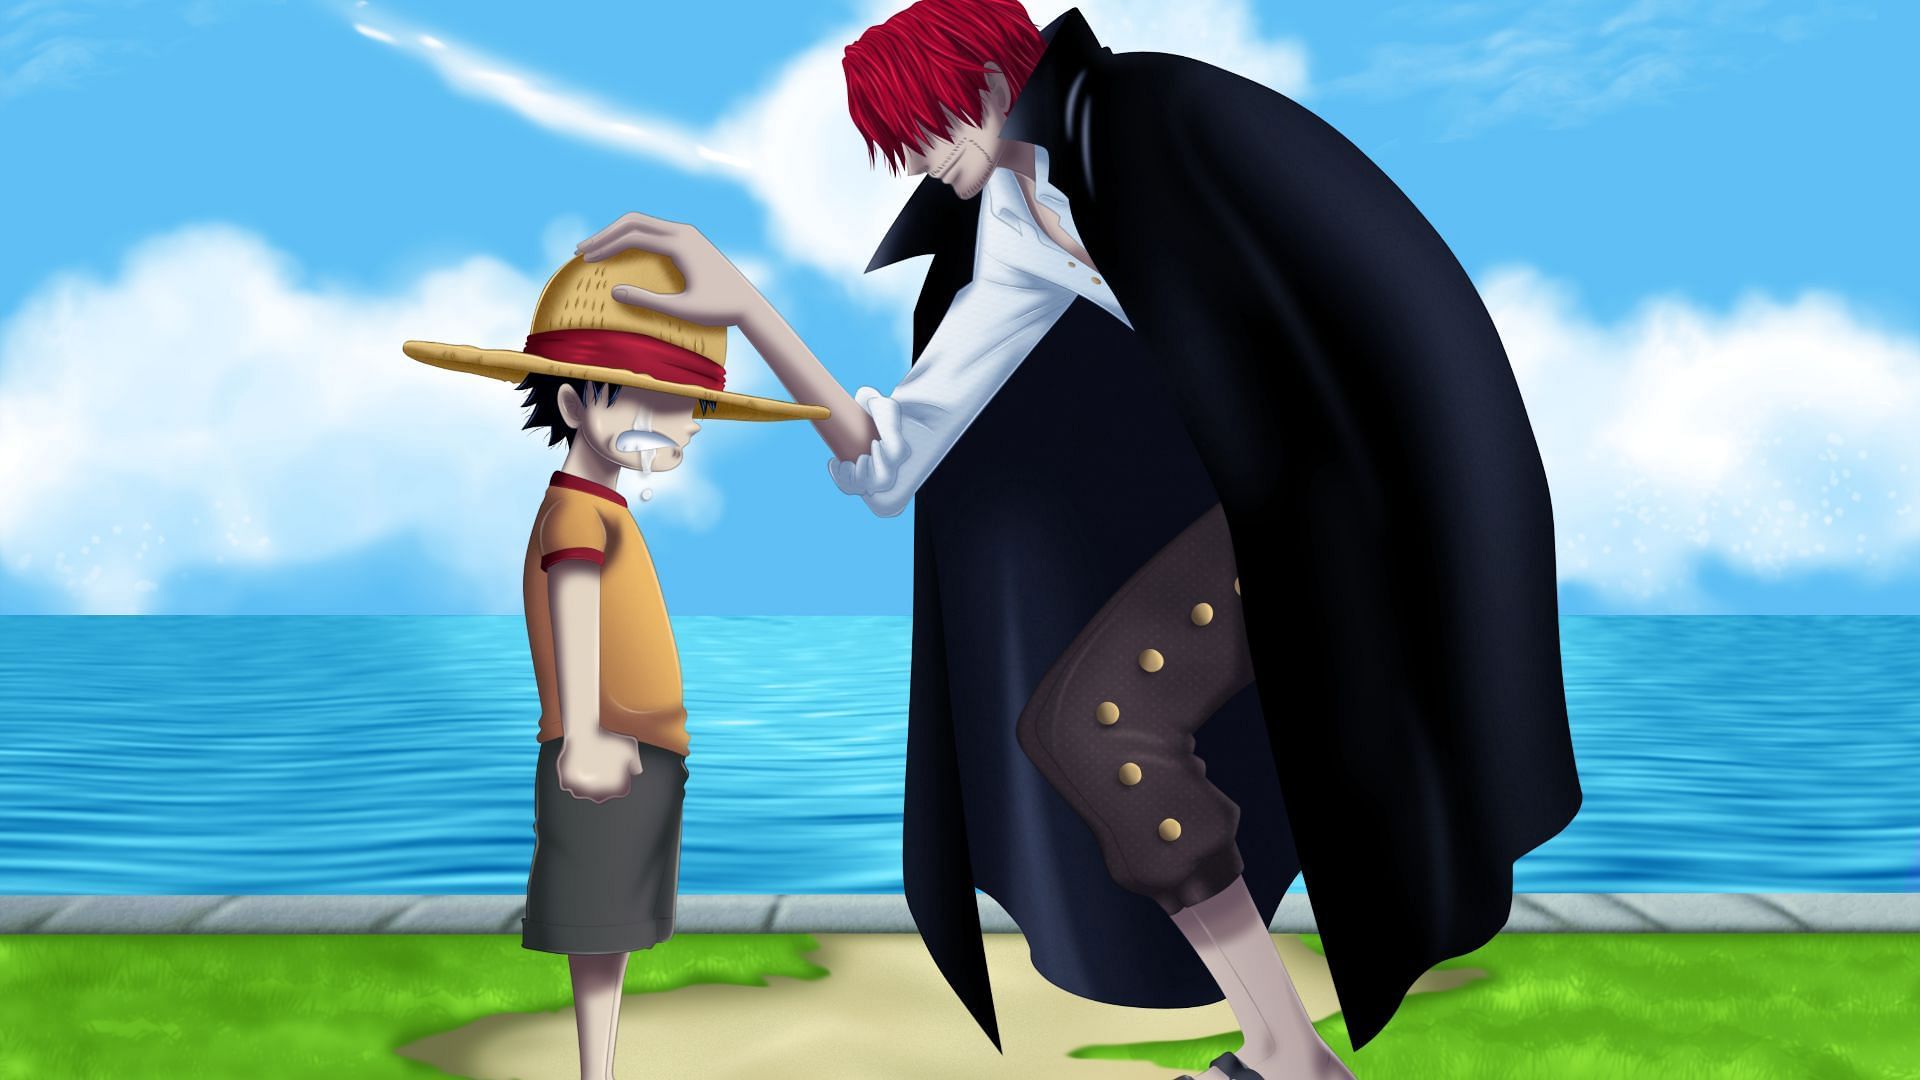 Shanks entrusting Luffy with the straw hat he inherited from Roger (Image via Eiichiro Oda/Shueisha, One Piece)